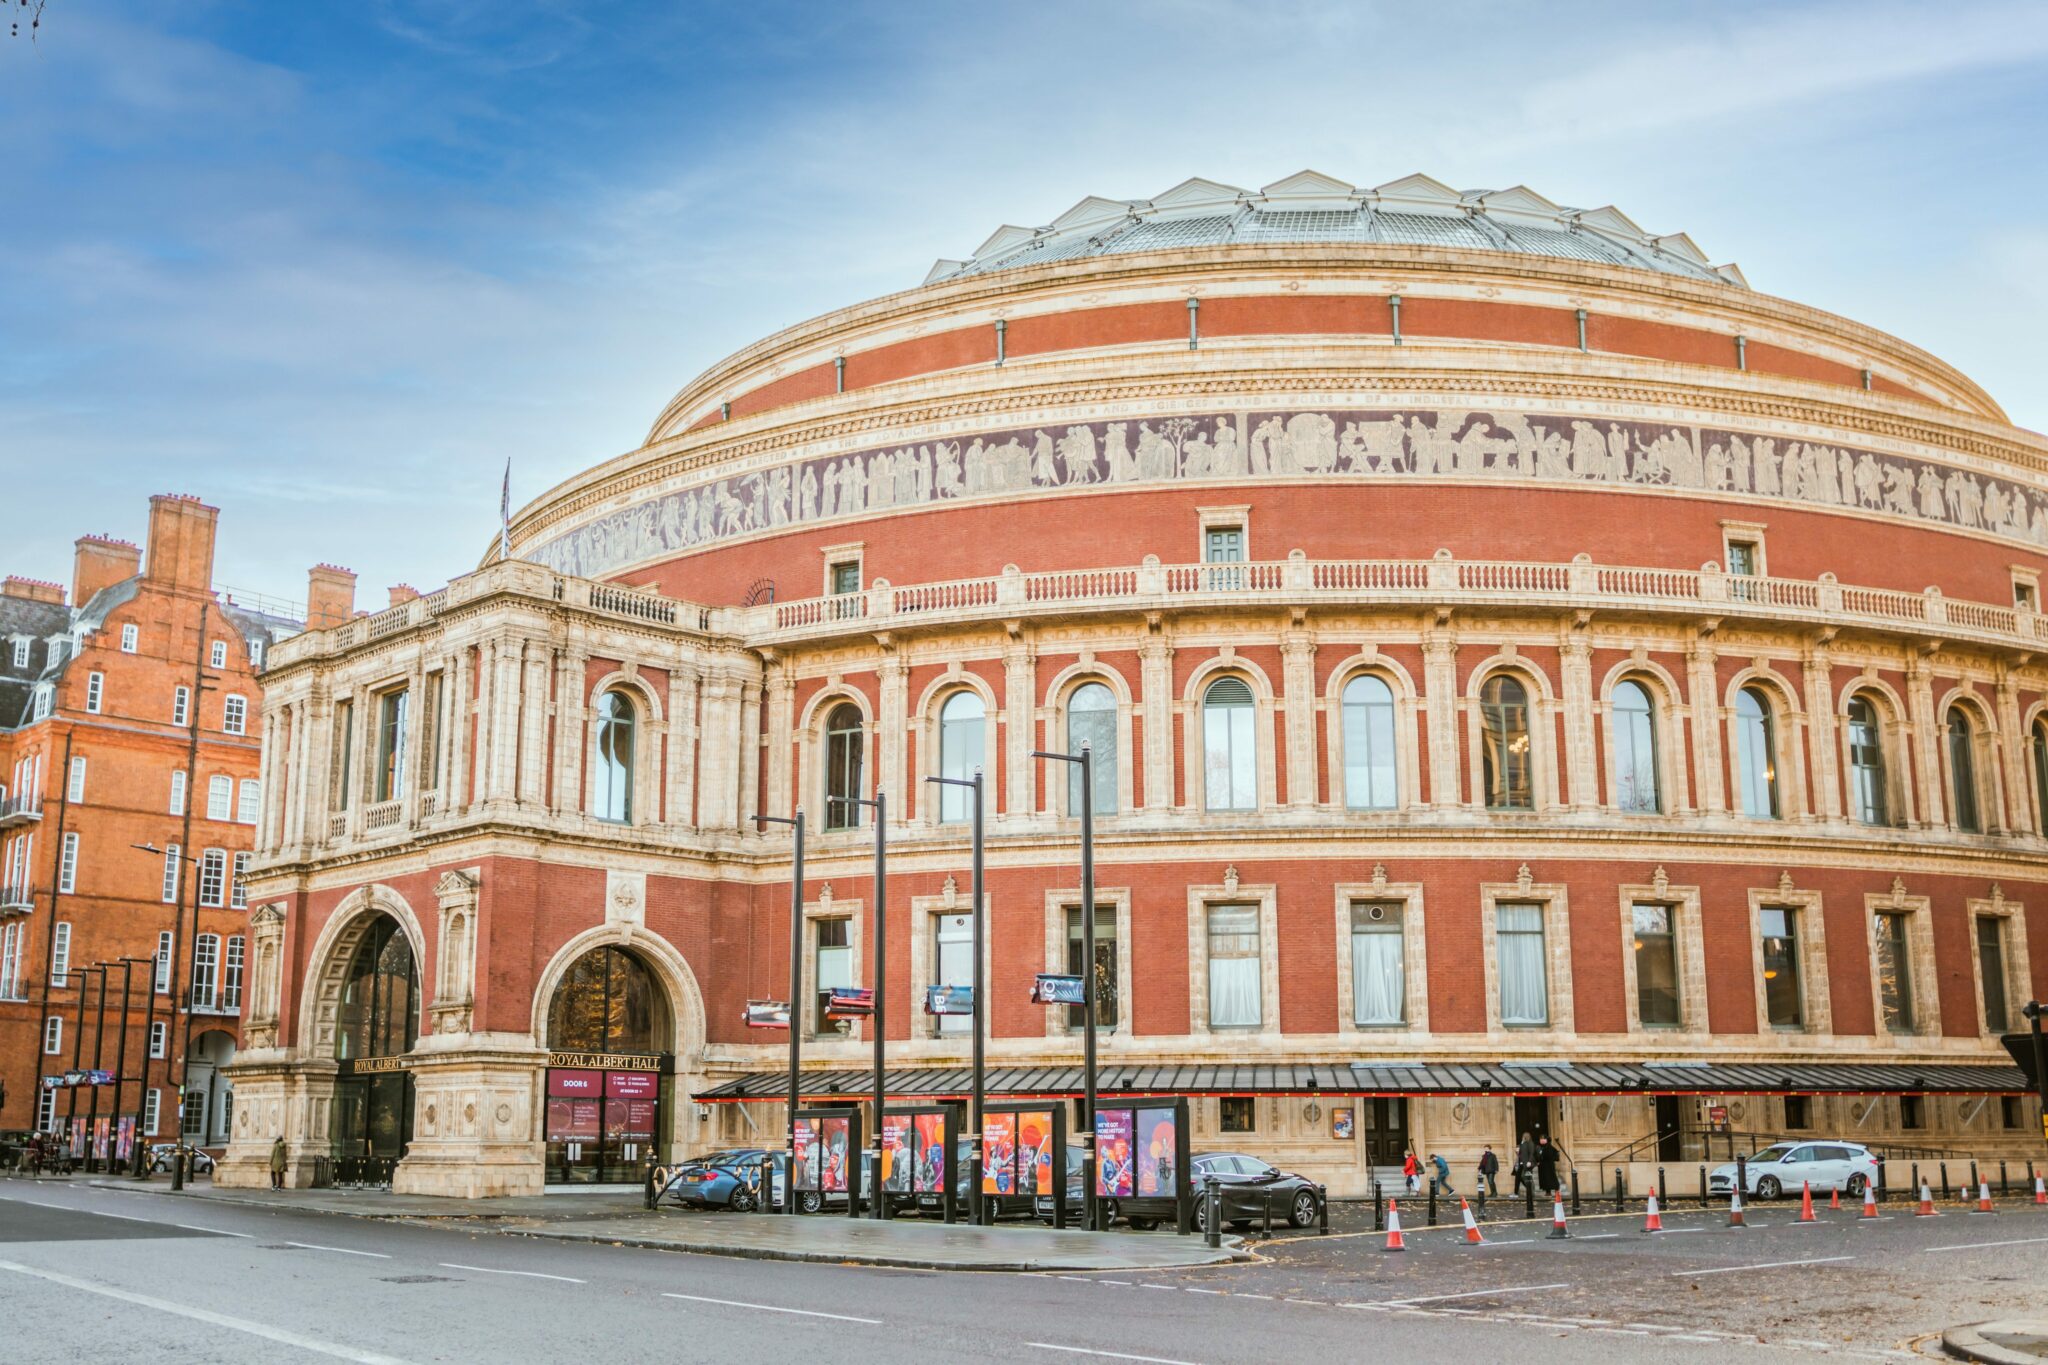 The Royal Albert Hall from outside